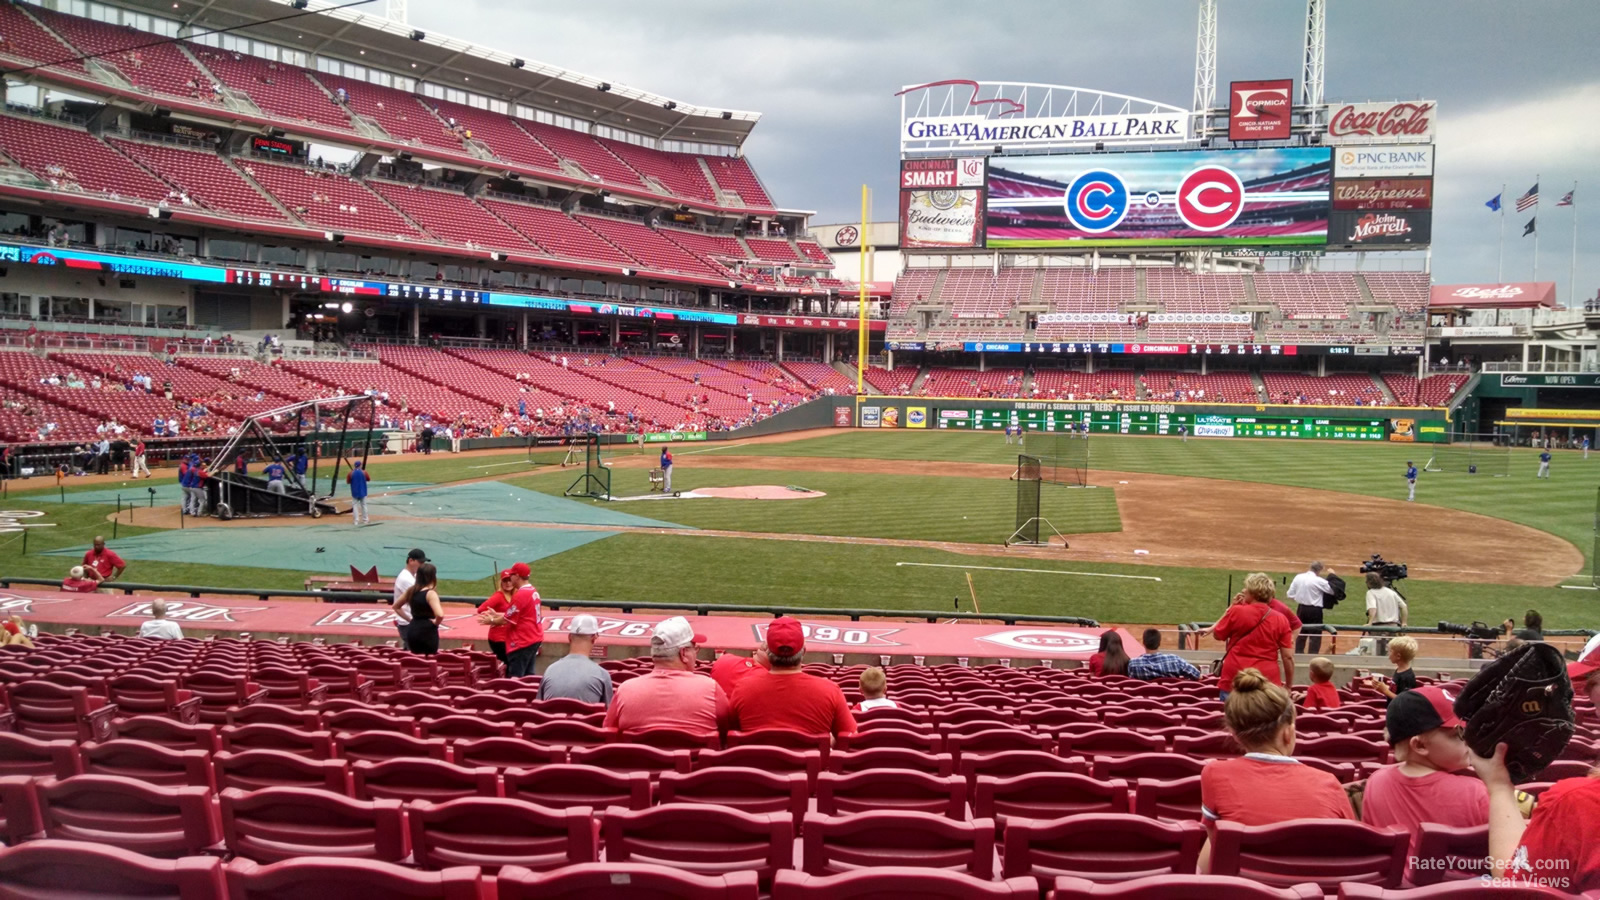 Reds Seating Chart With Prices